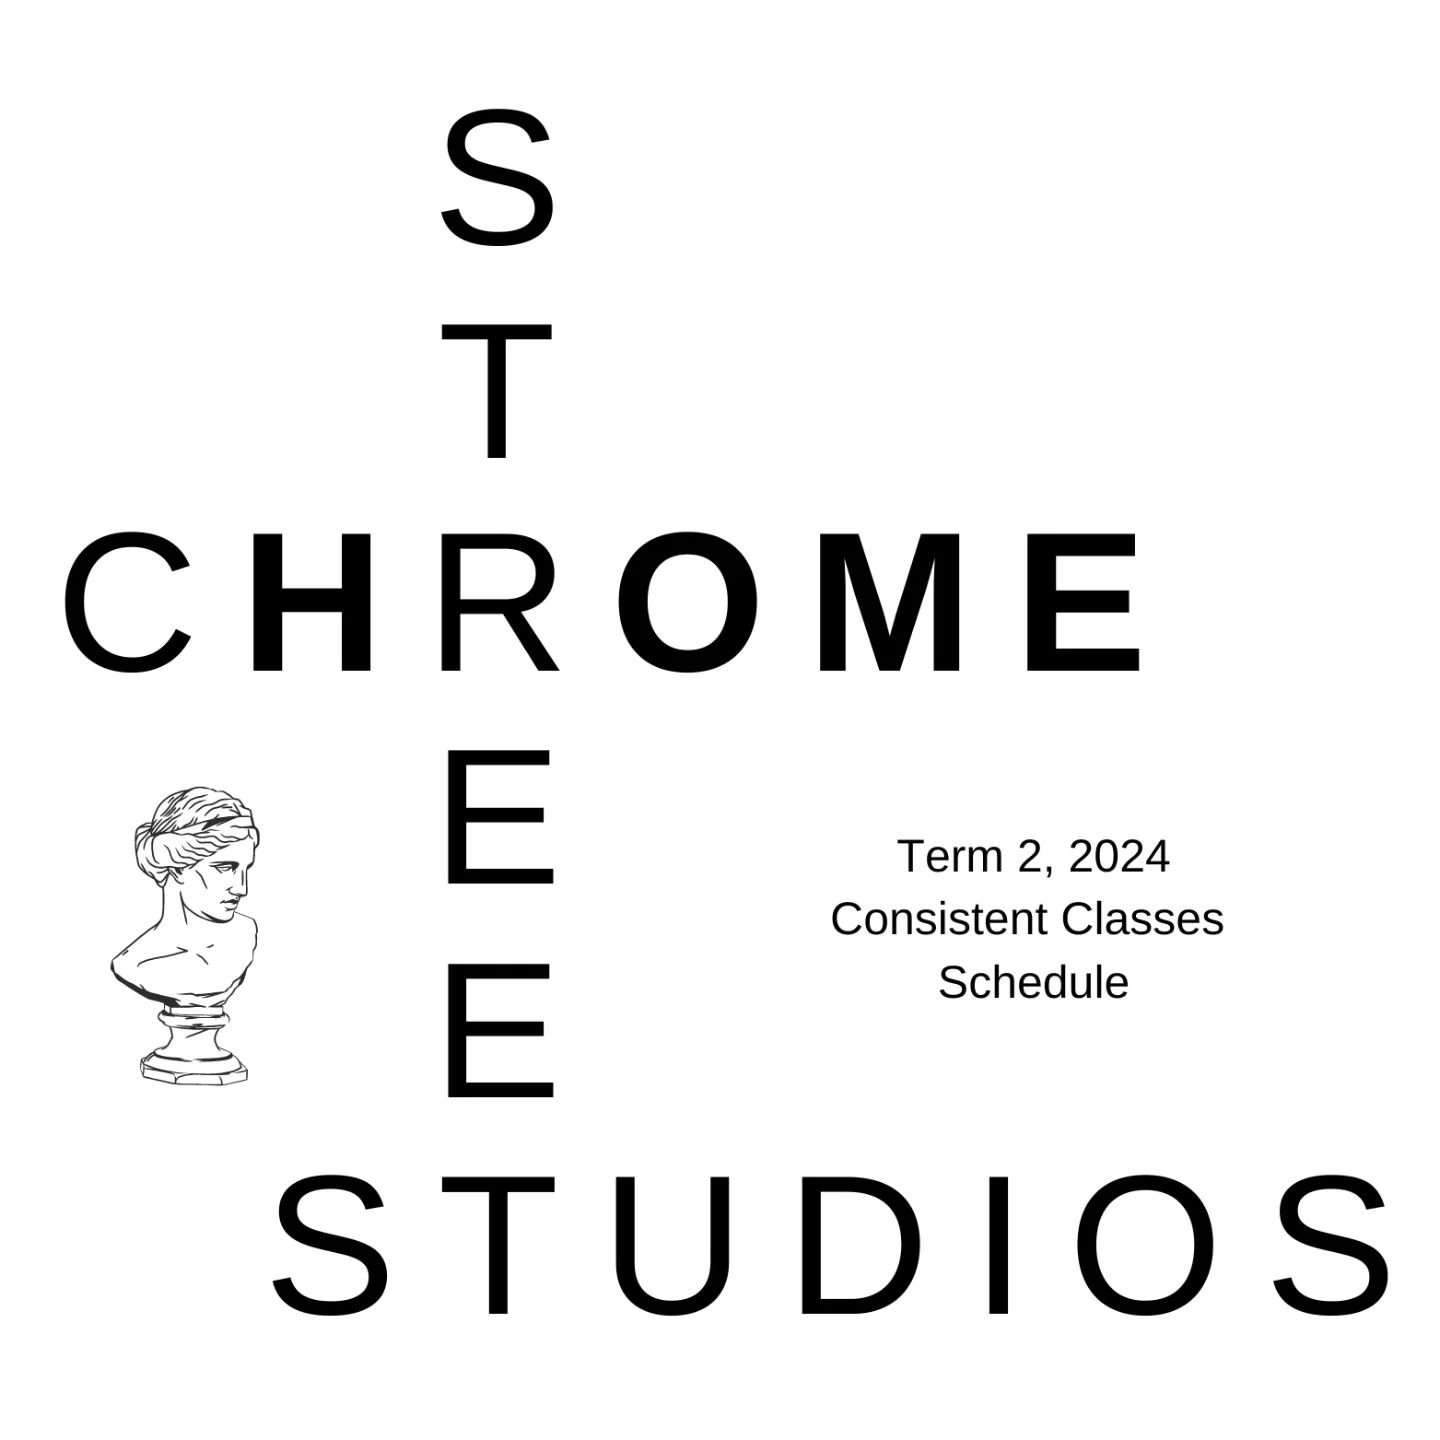 Term 2 begins soon from 15th April to 23rd June!
🔗 Visit 'Class and Workshops' on our website or https://www.chromestreetstudios.com/classes-and-workshops

Welcome back, you amazing artists! Hope to see new faces too!

✉️ Feel free to drop us a spec